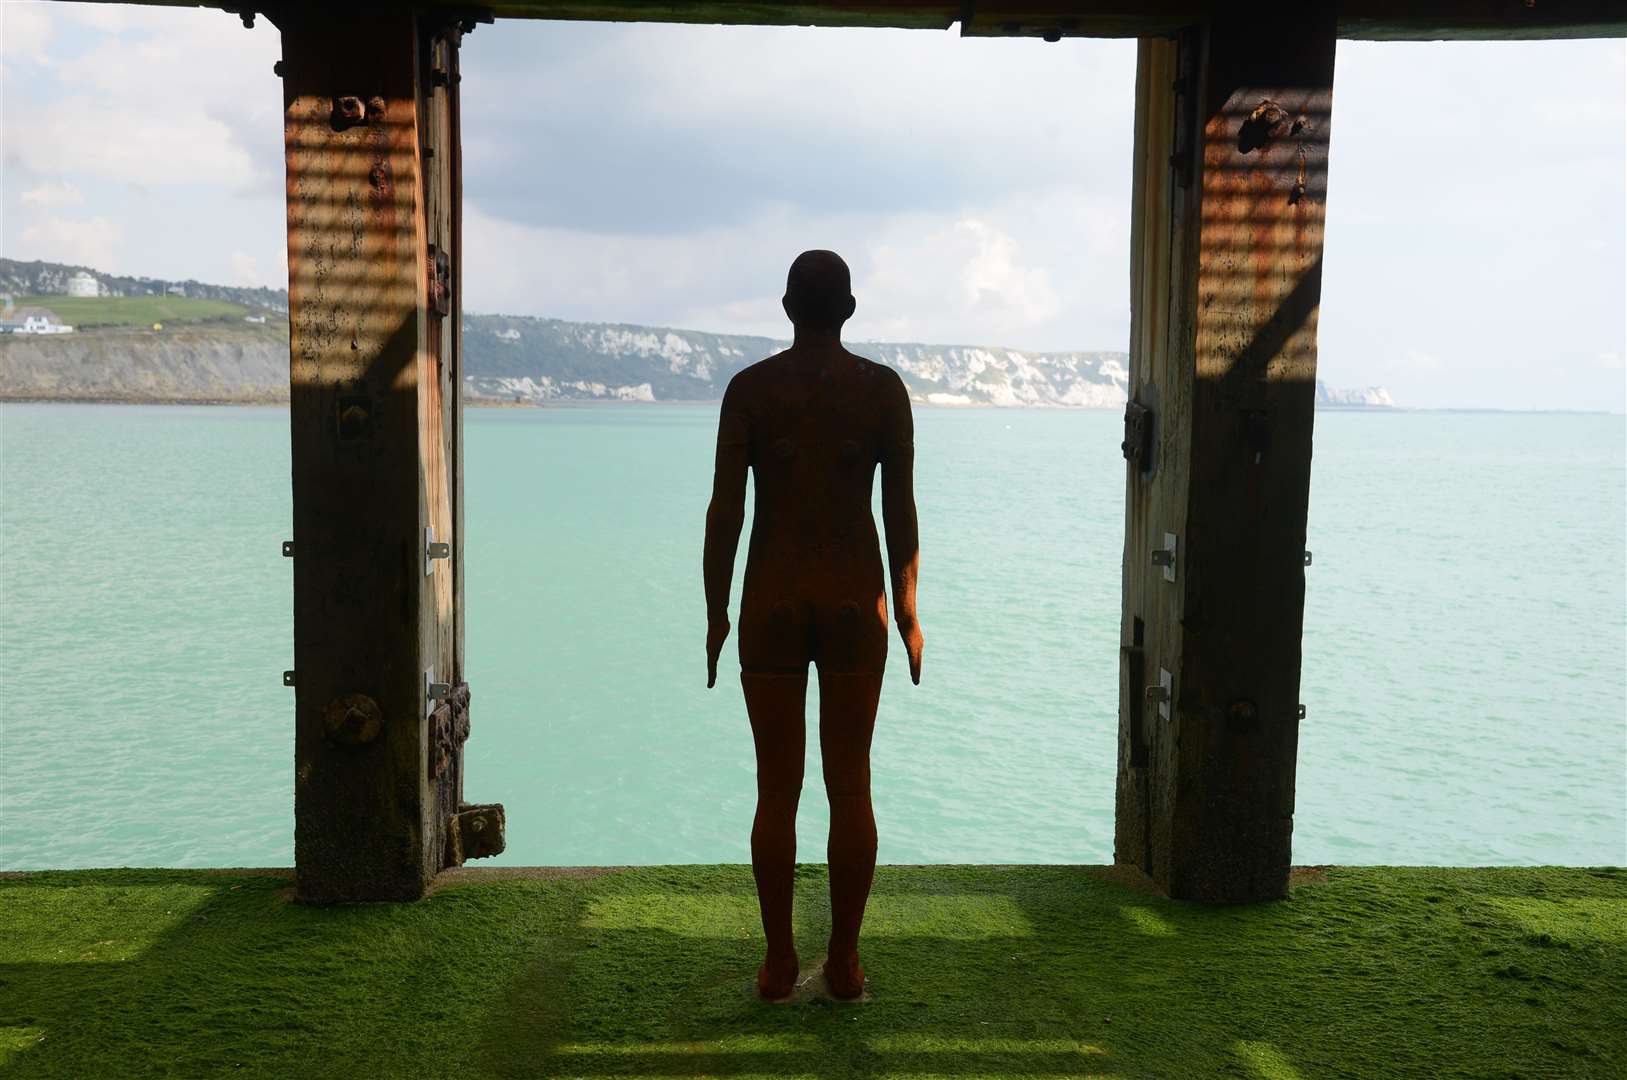 The Antony Gormley statue at Folkestone - how art has helped revitalise the town. There’s one in Margate too. Picture: Gary Browne